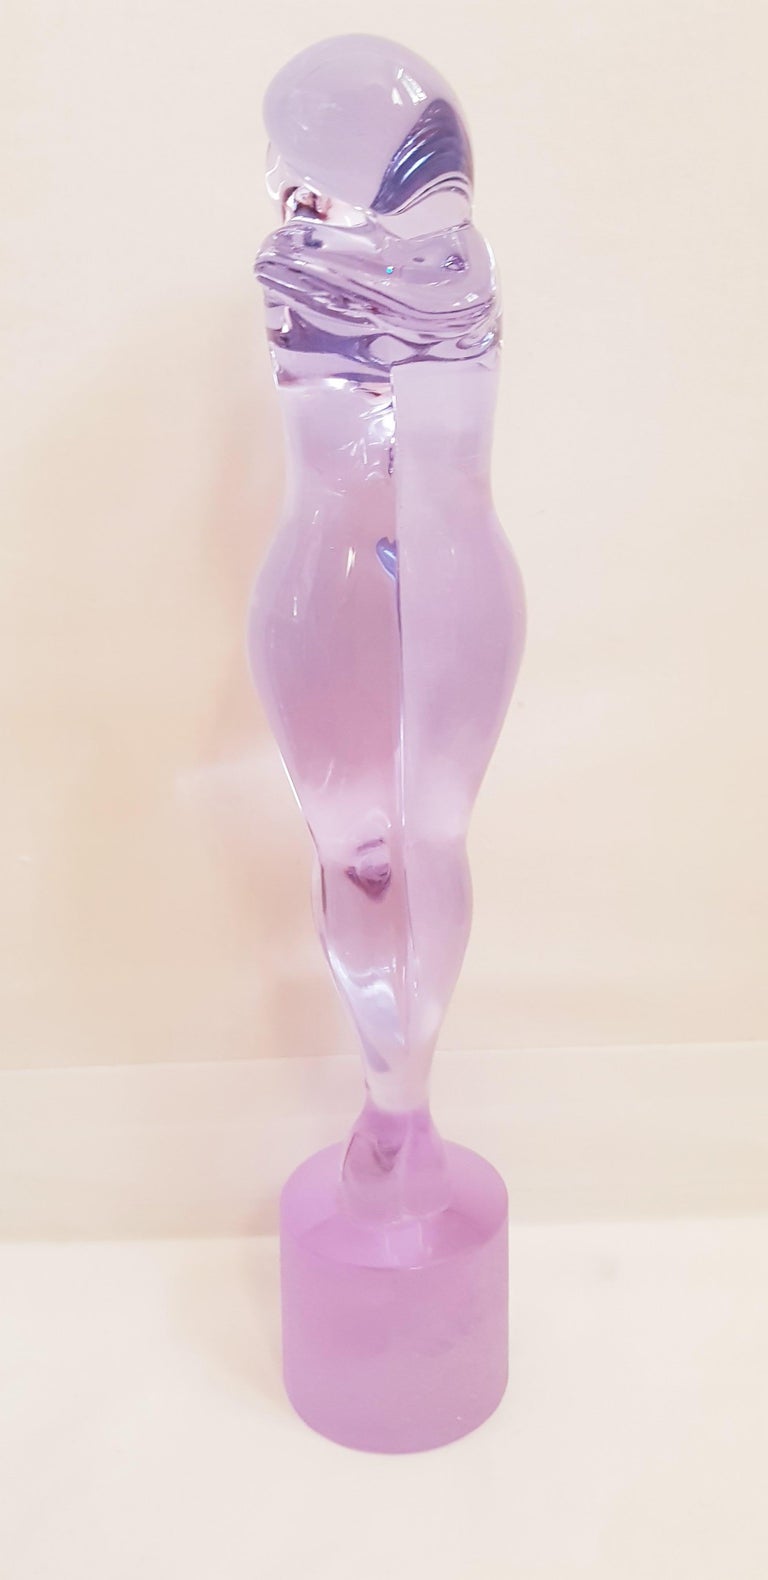 Beautiful Alexandrit Neodymium glass abstract sculpture, lovers signed by Andreea Tagliapietra brilliant condition. 